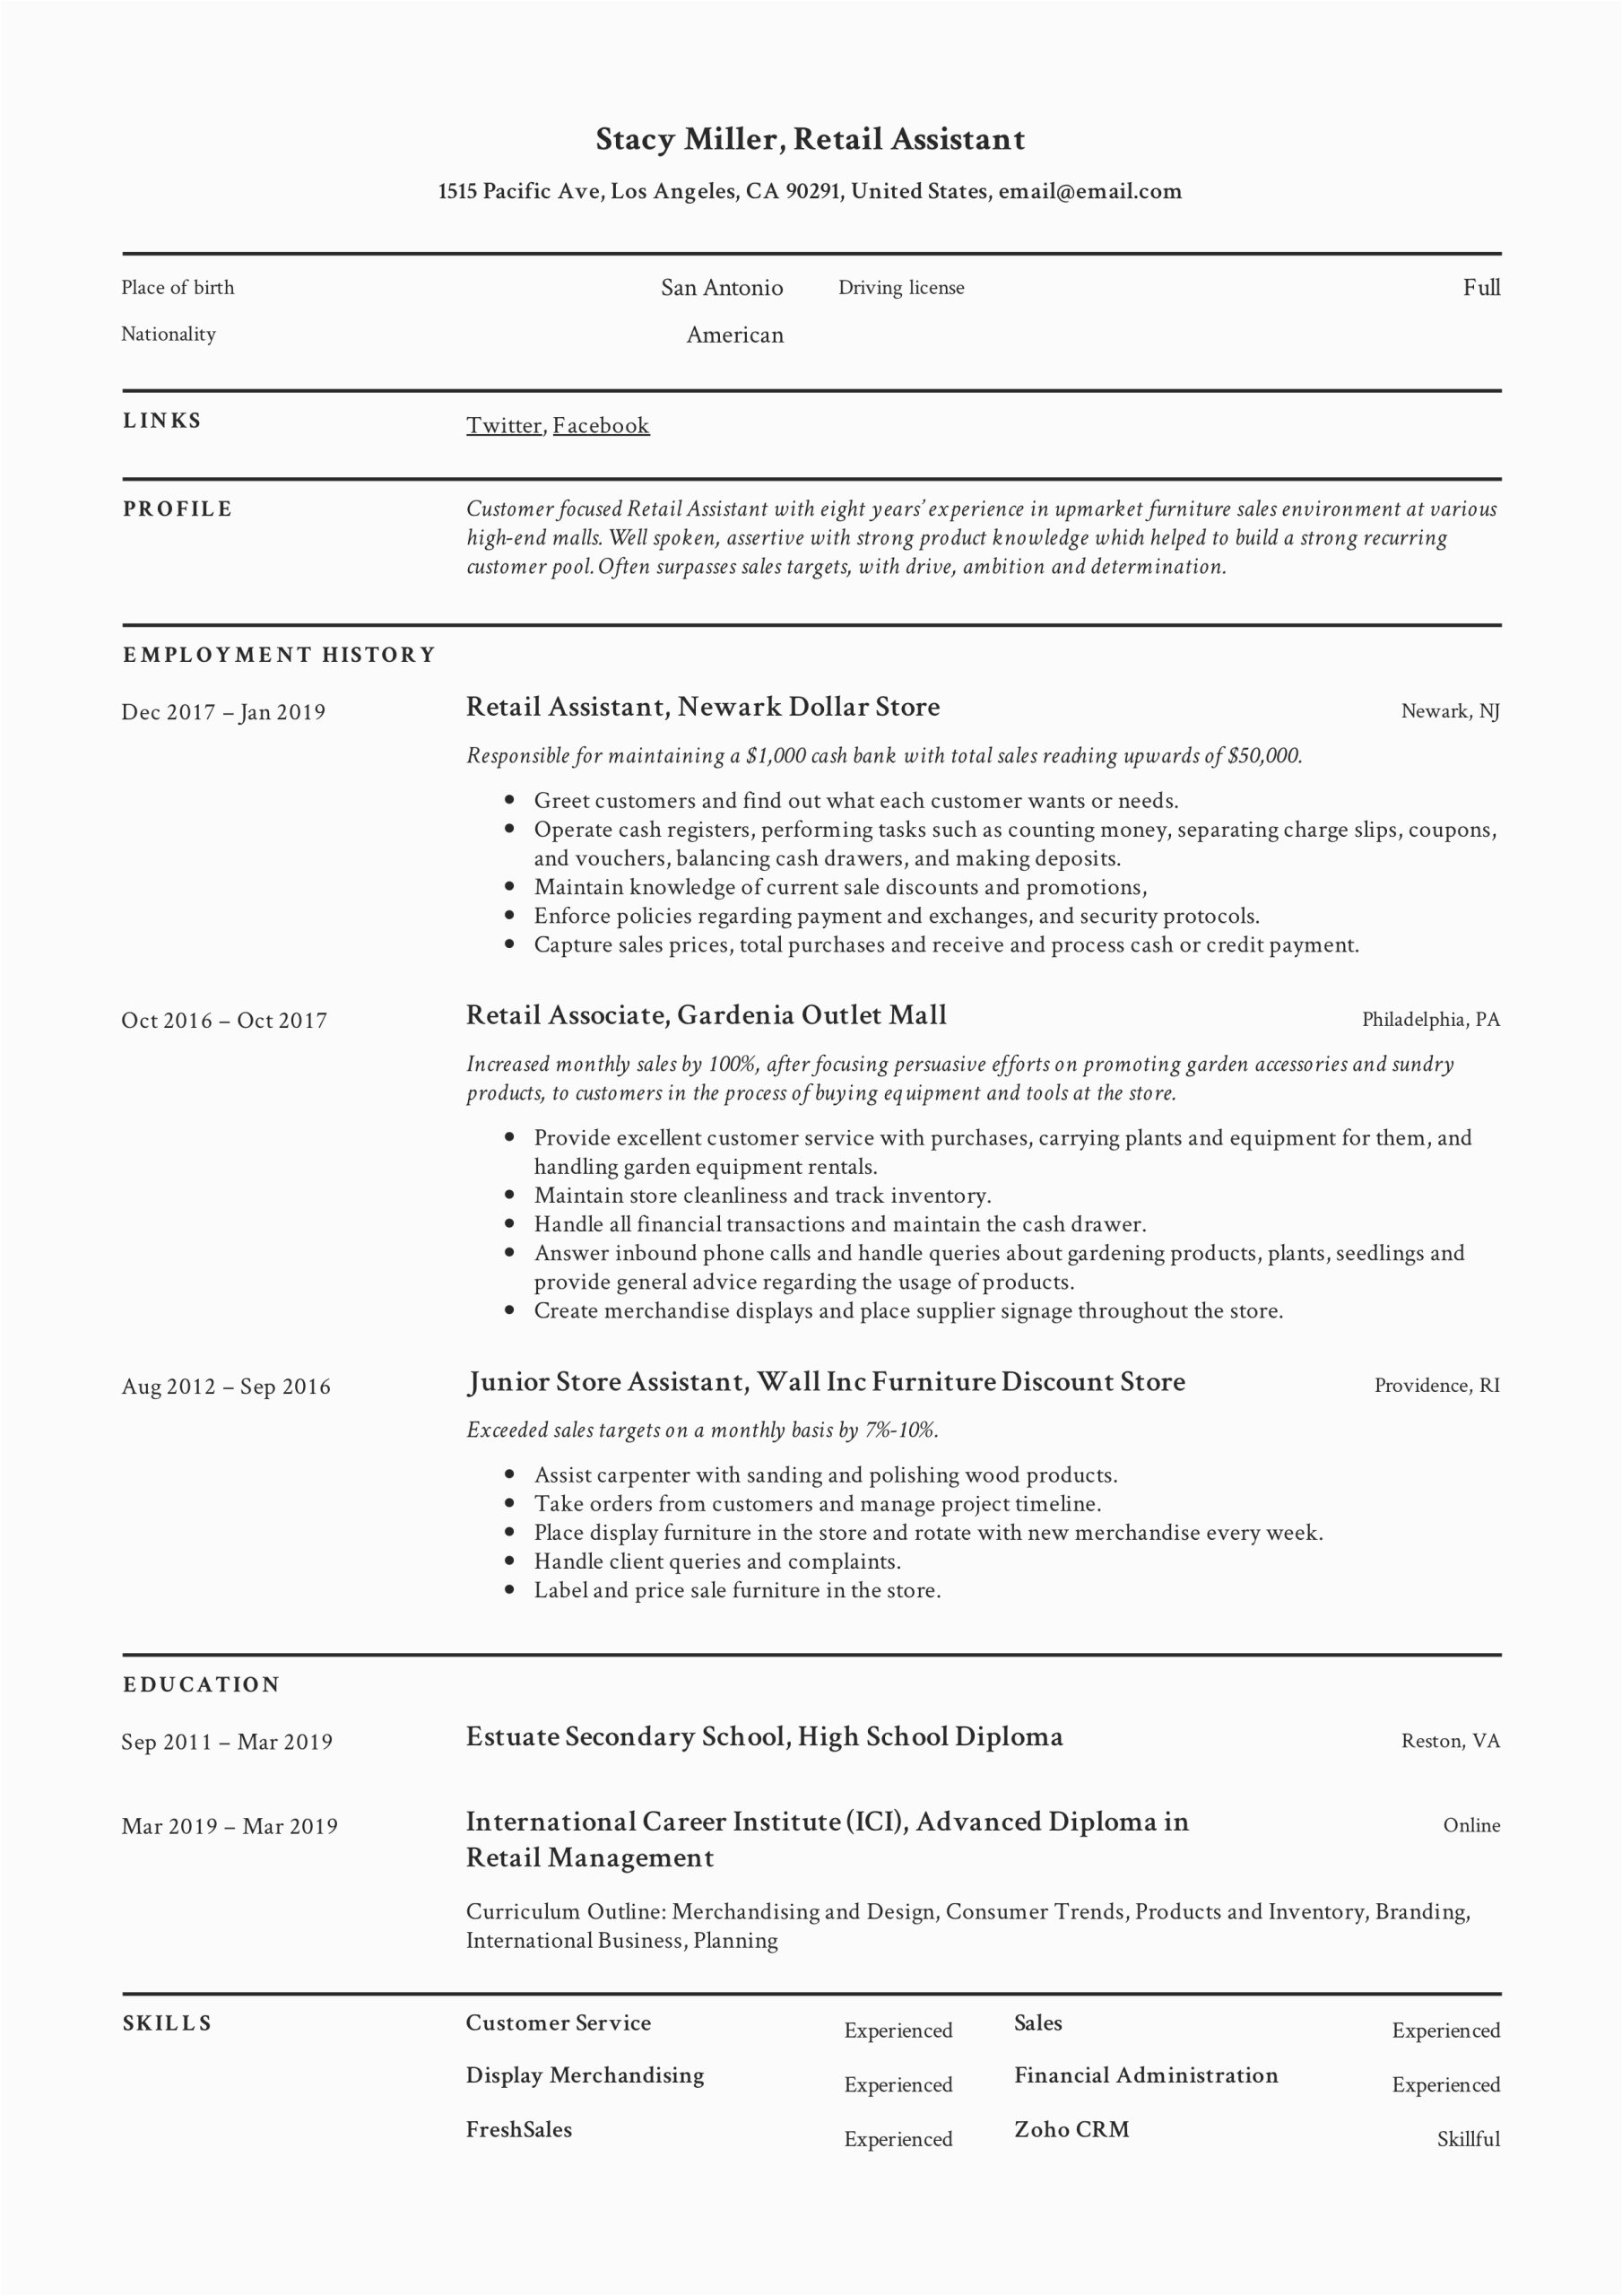 Resume Sample for Retail Sales Job 12 Retail assistant Resume Samples & Writing Guide